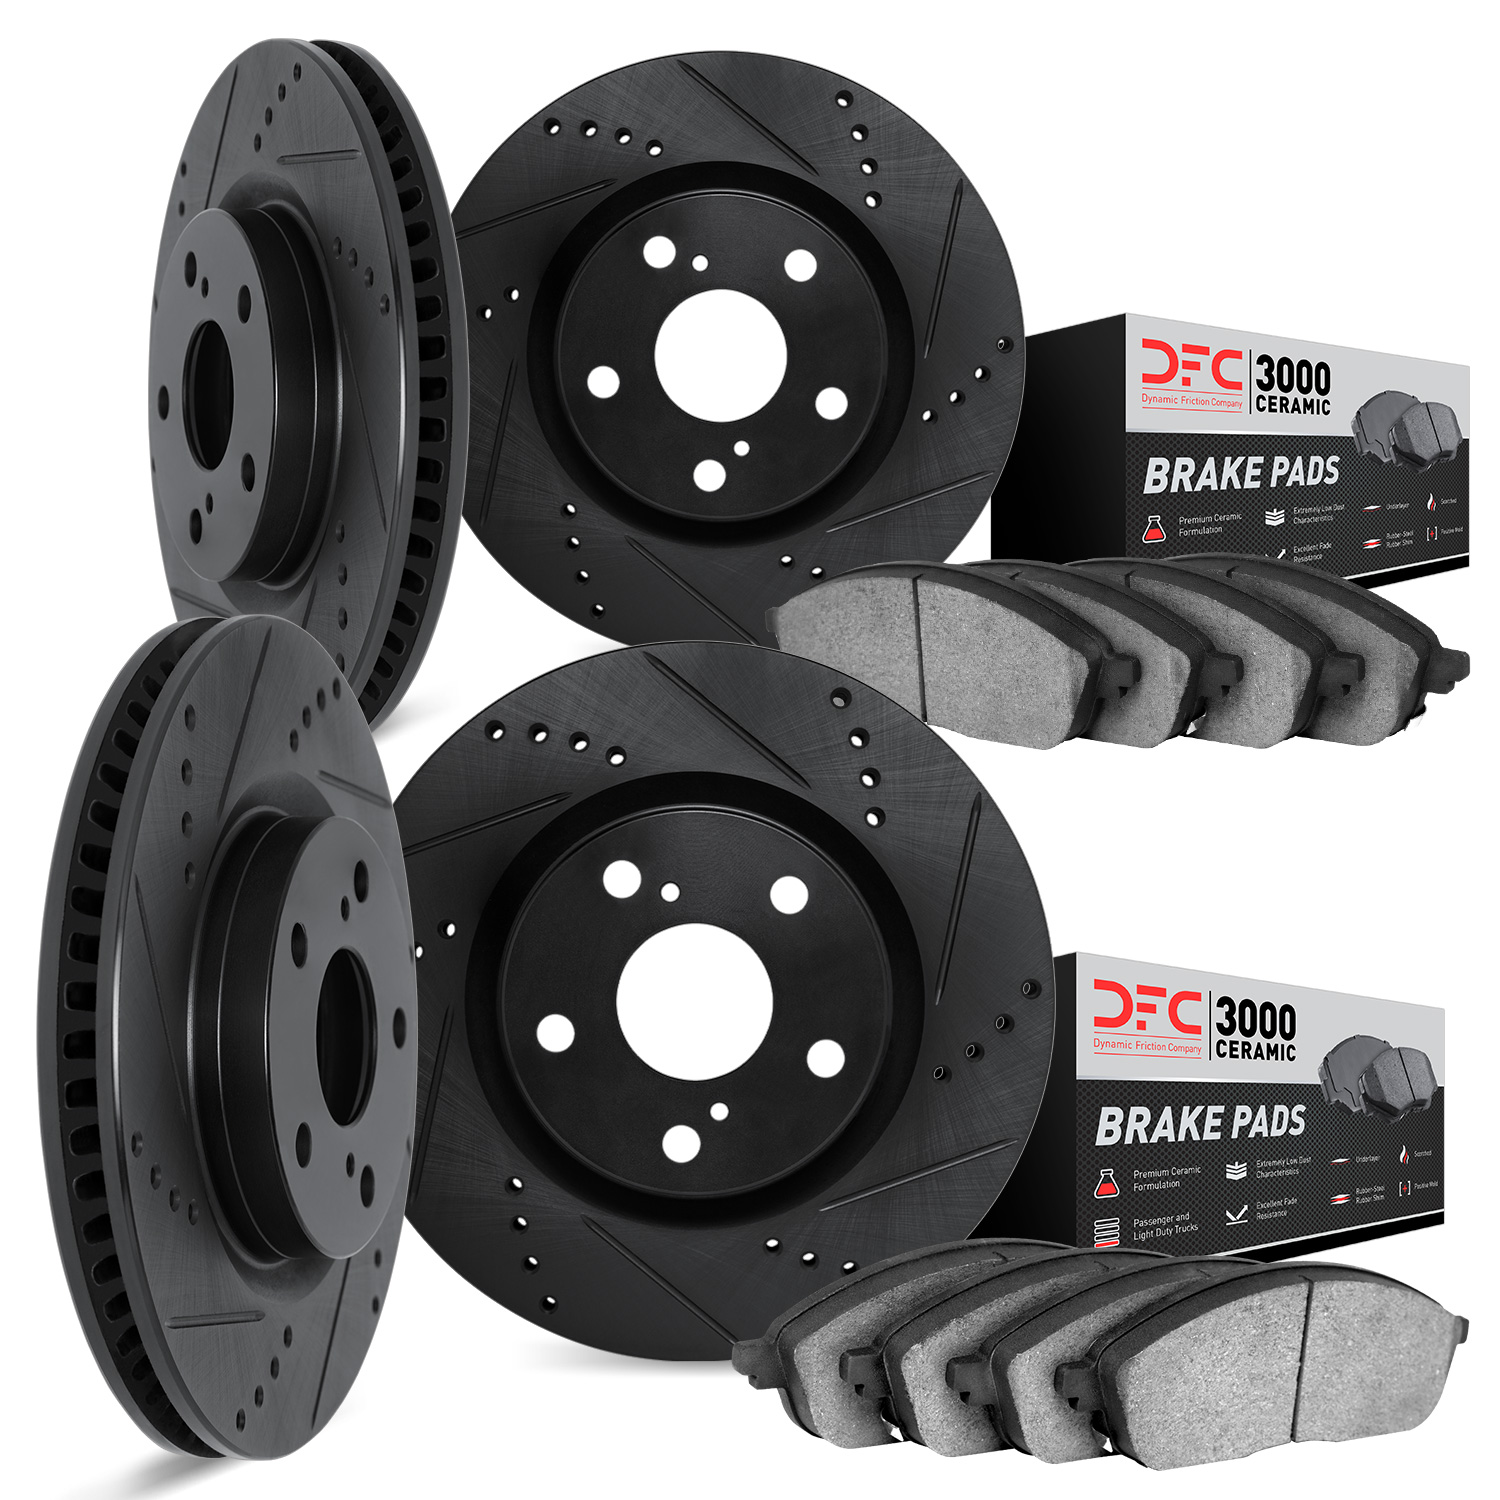 8304-31071 Dimpled/Slotted Brake Rotors with 3000-Series Ceramic Brake Pads Kit [Black], 2016-2018 BMW, Position: Front and Rear